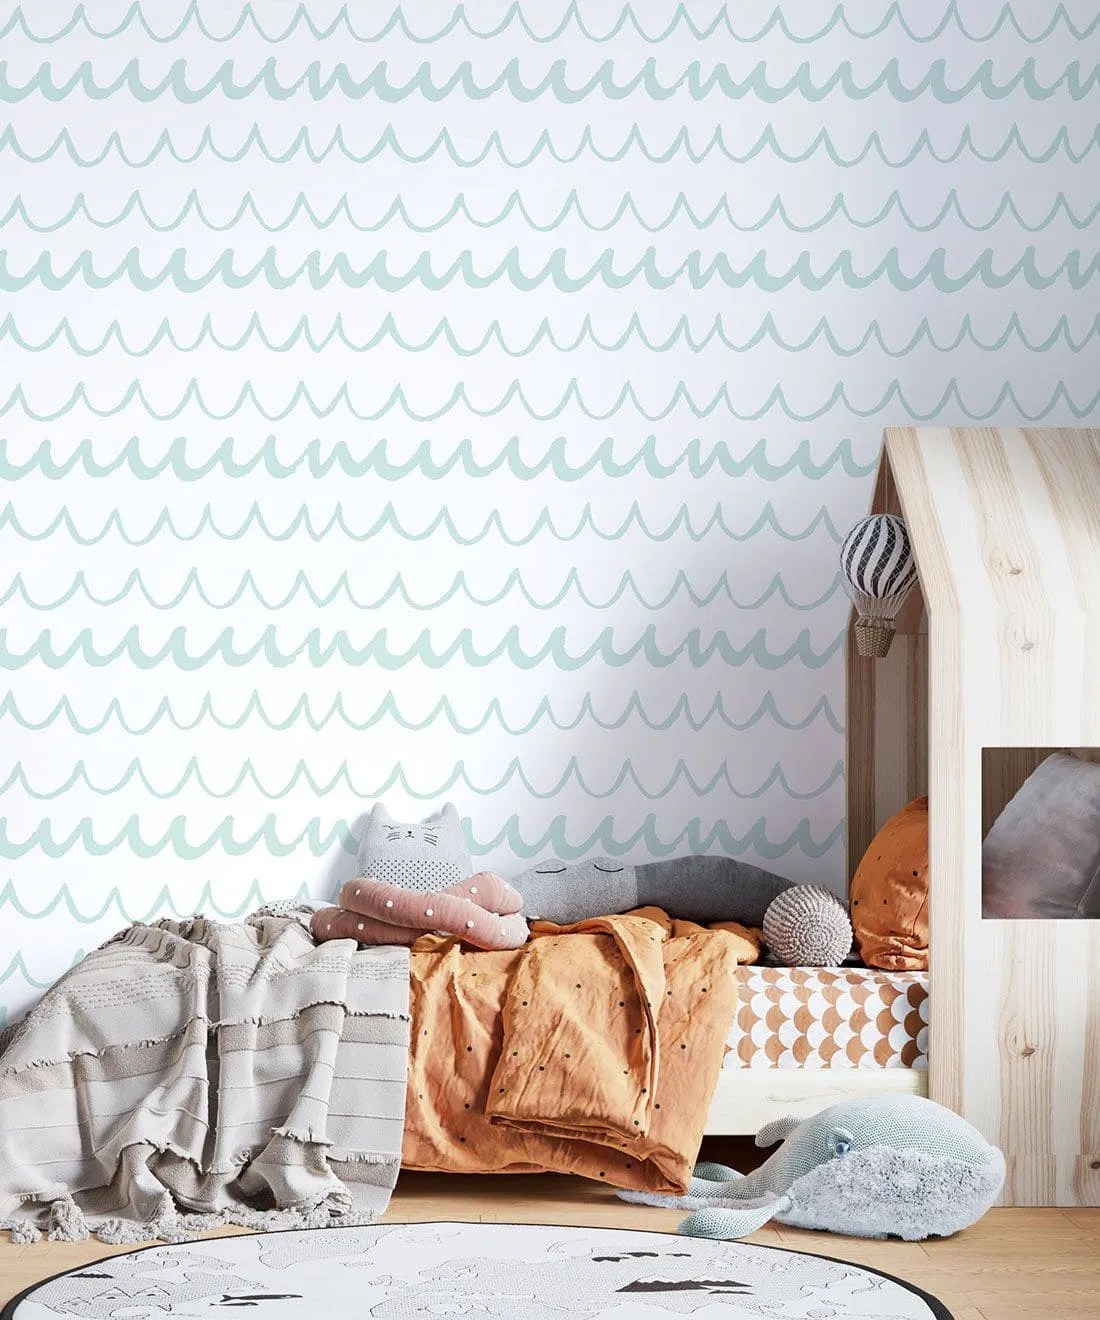 light blue wave patterns on a wallpaper in a boys room